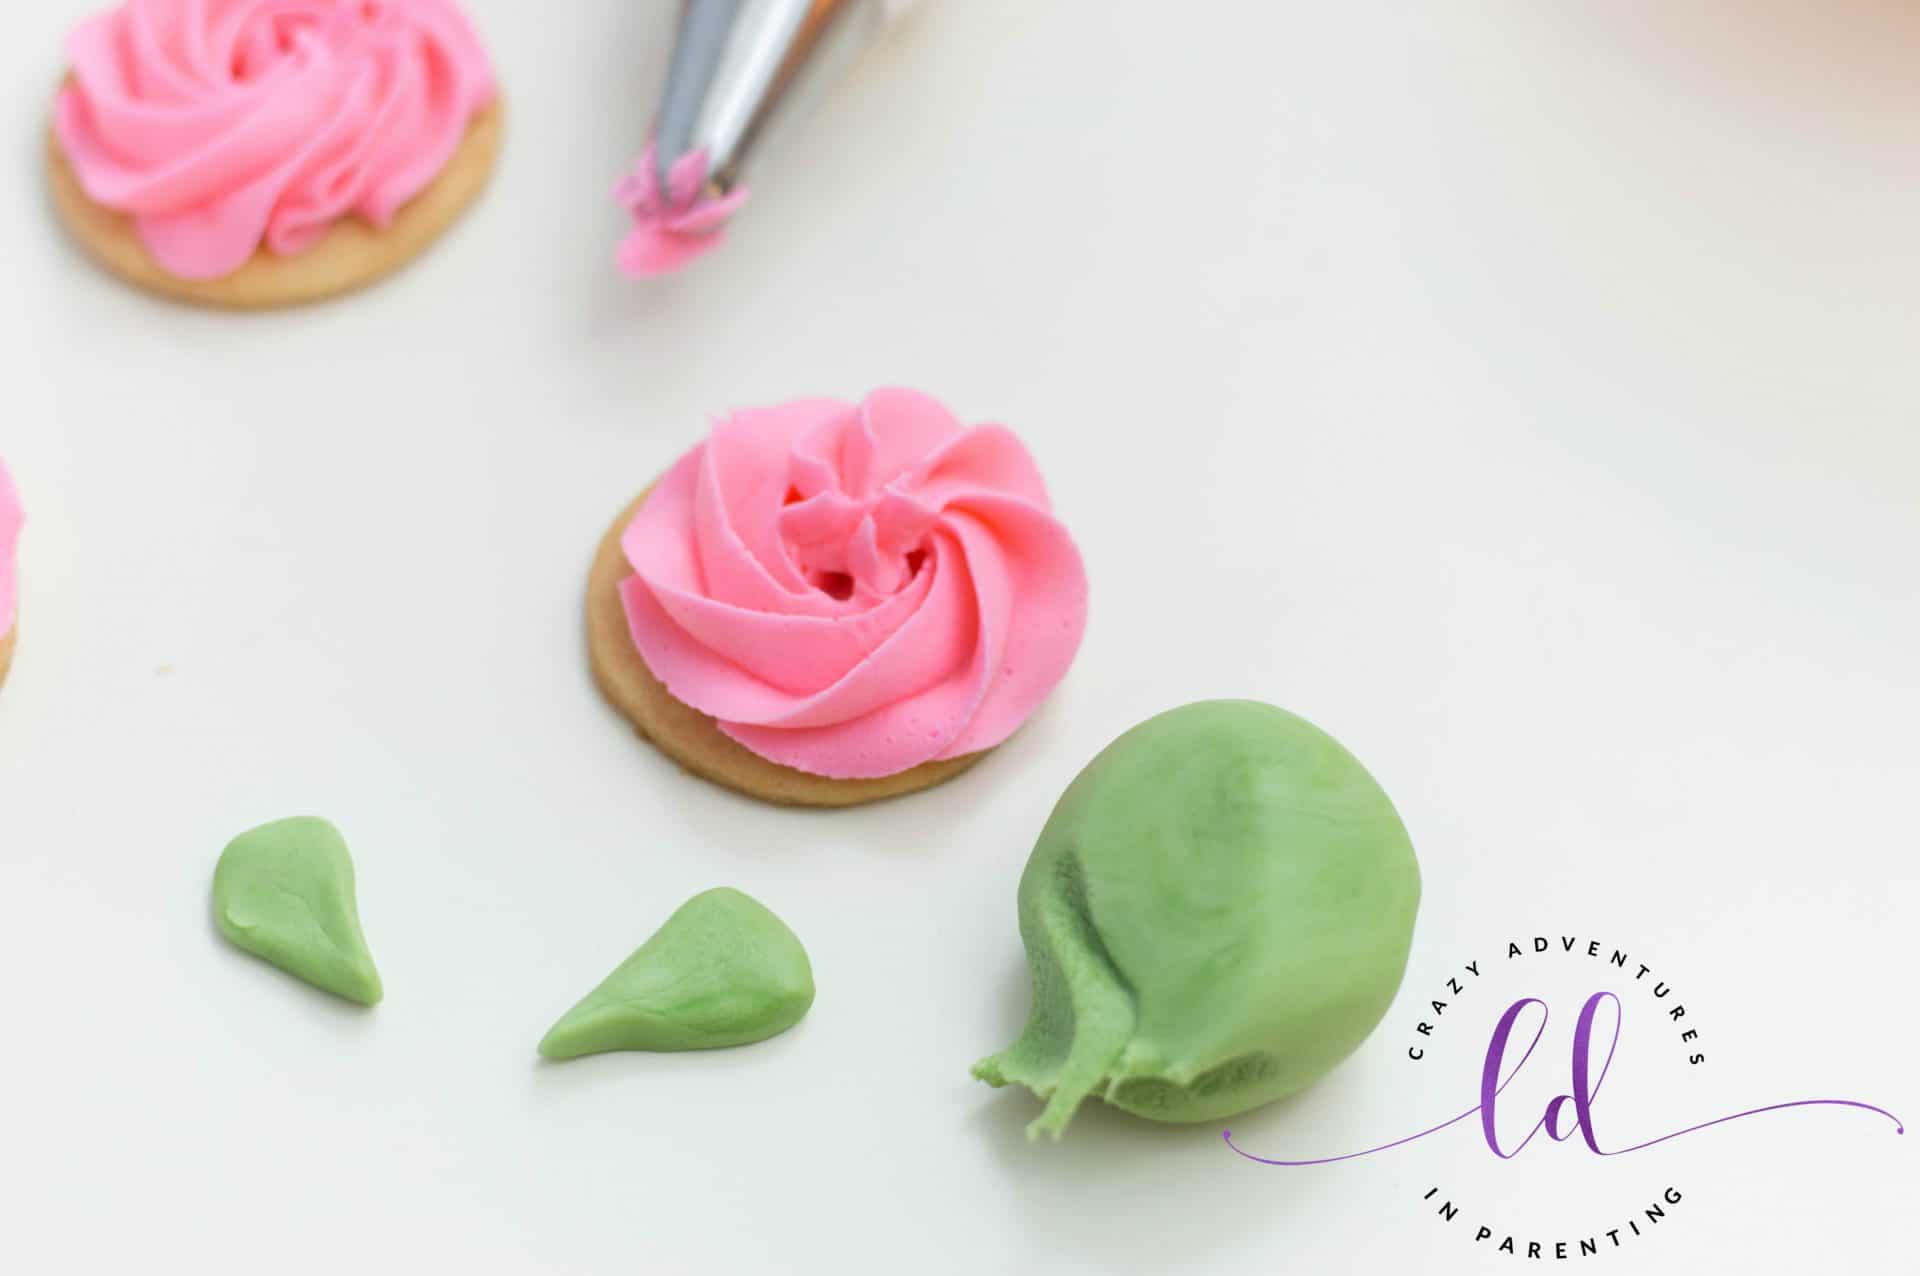 Create leaf shapes from green fondant for Rose Sugar Cookies